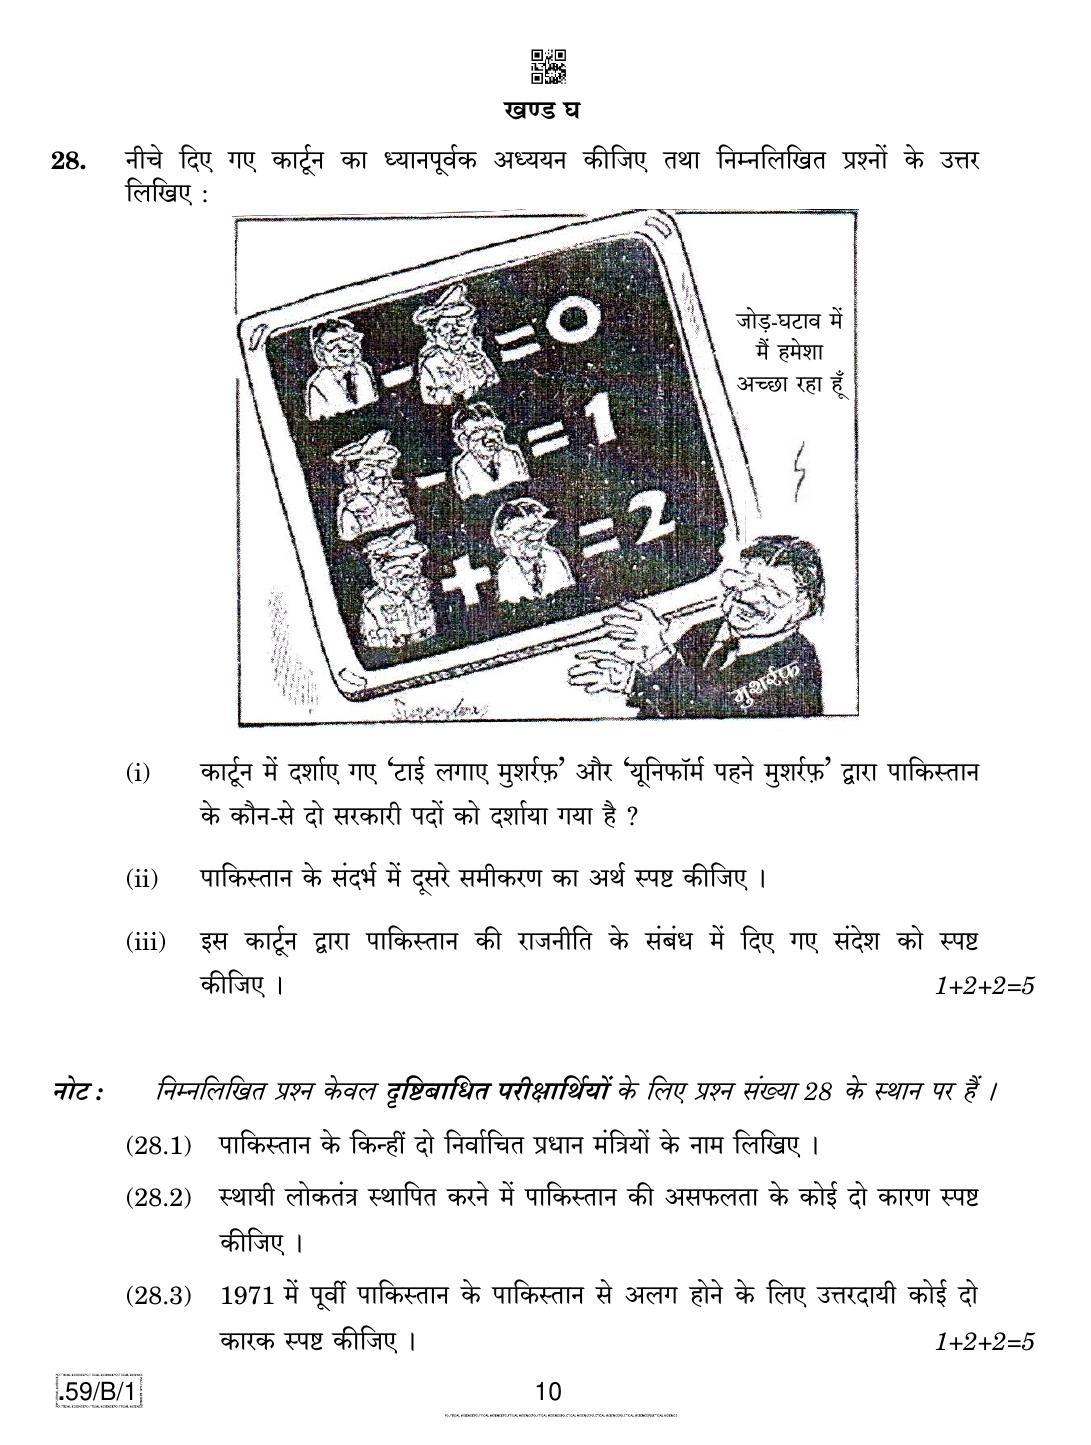 CBSE Class 12 59-C-1 - Political Science 2020 Compartment Question Paper - Page 10